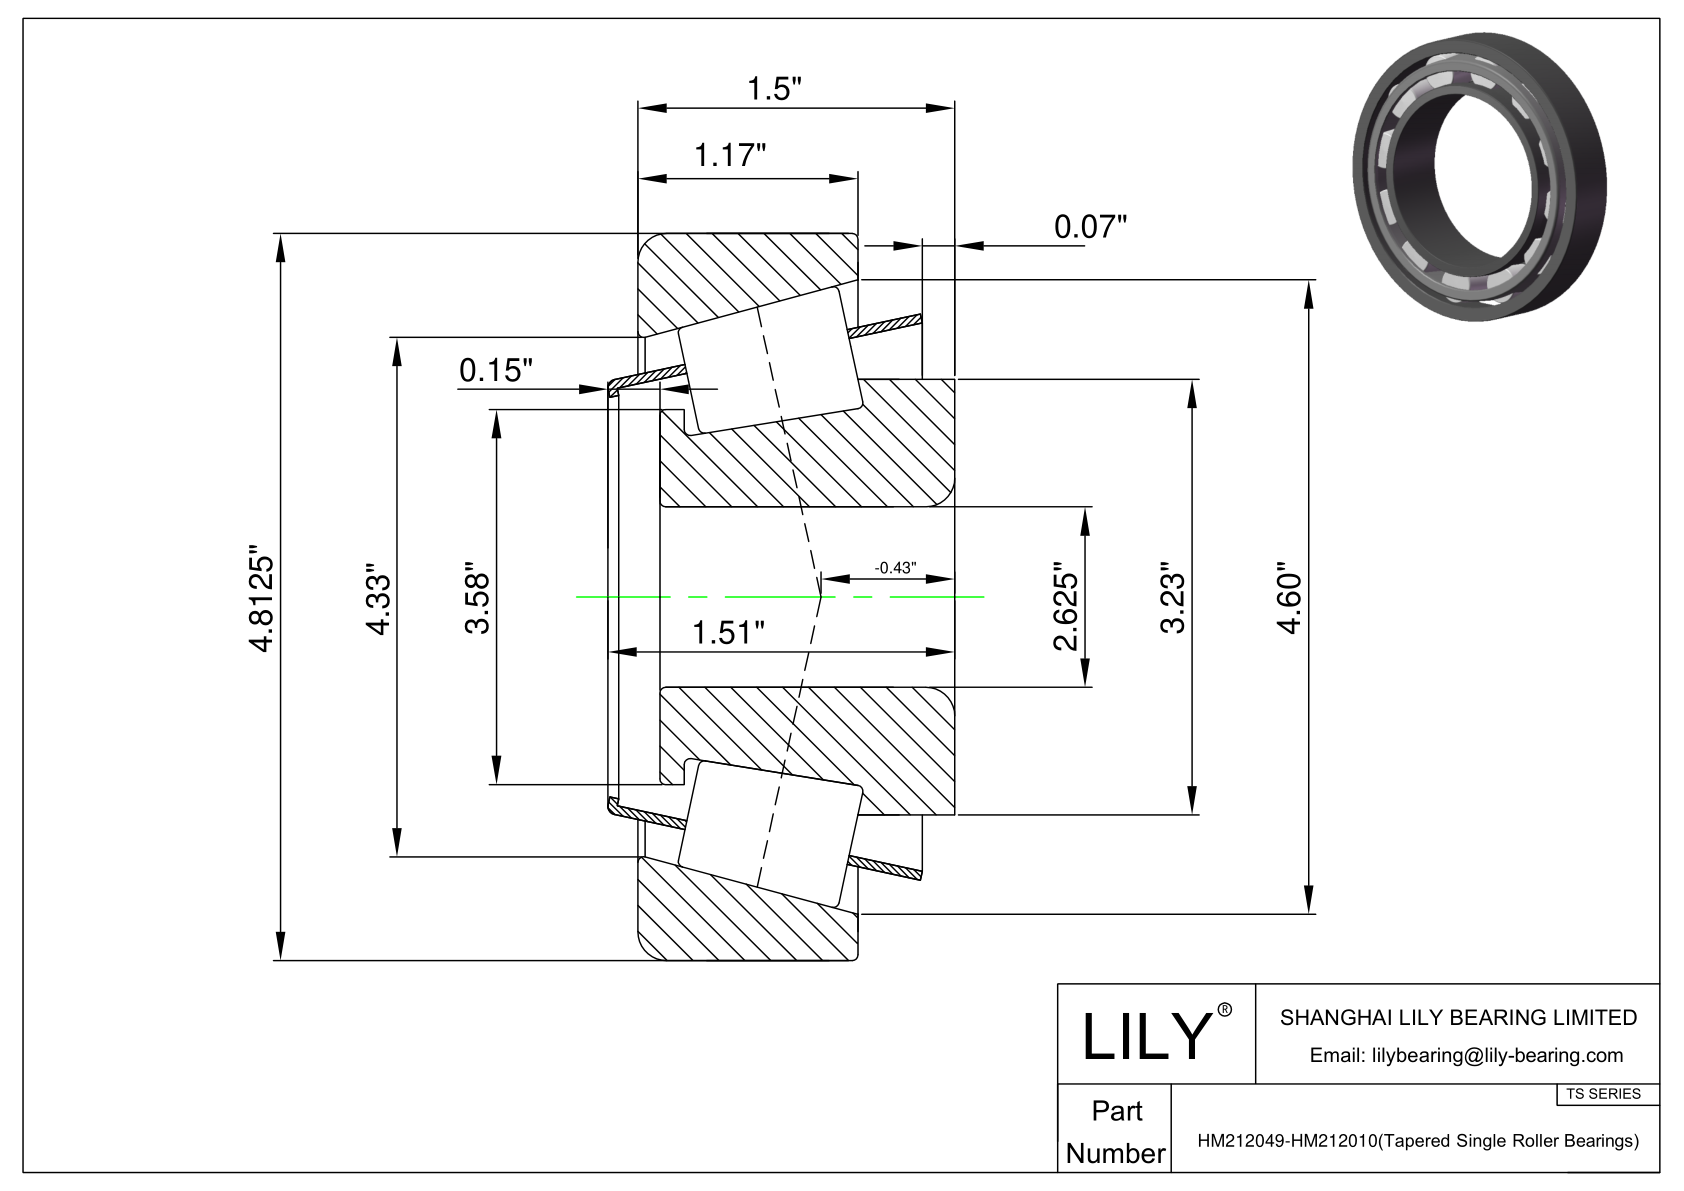 HM212049-HM212010 TS (Tapered Single Roller Bearings) (Imperial) cad drawing